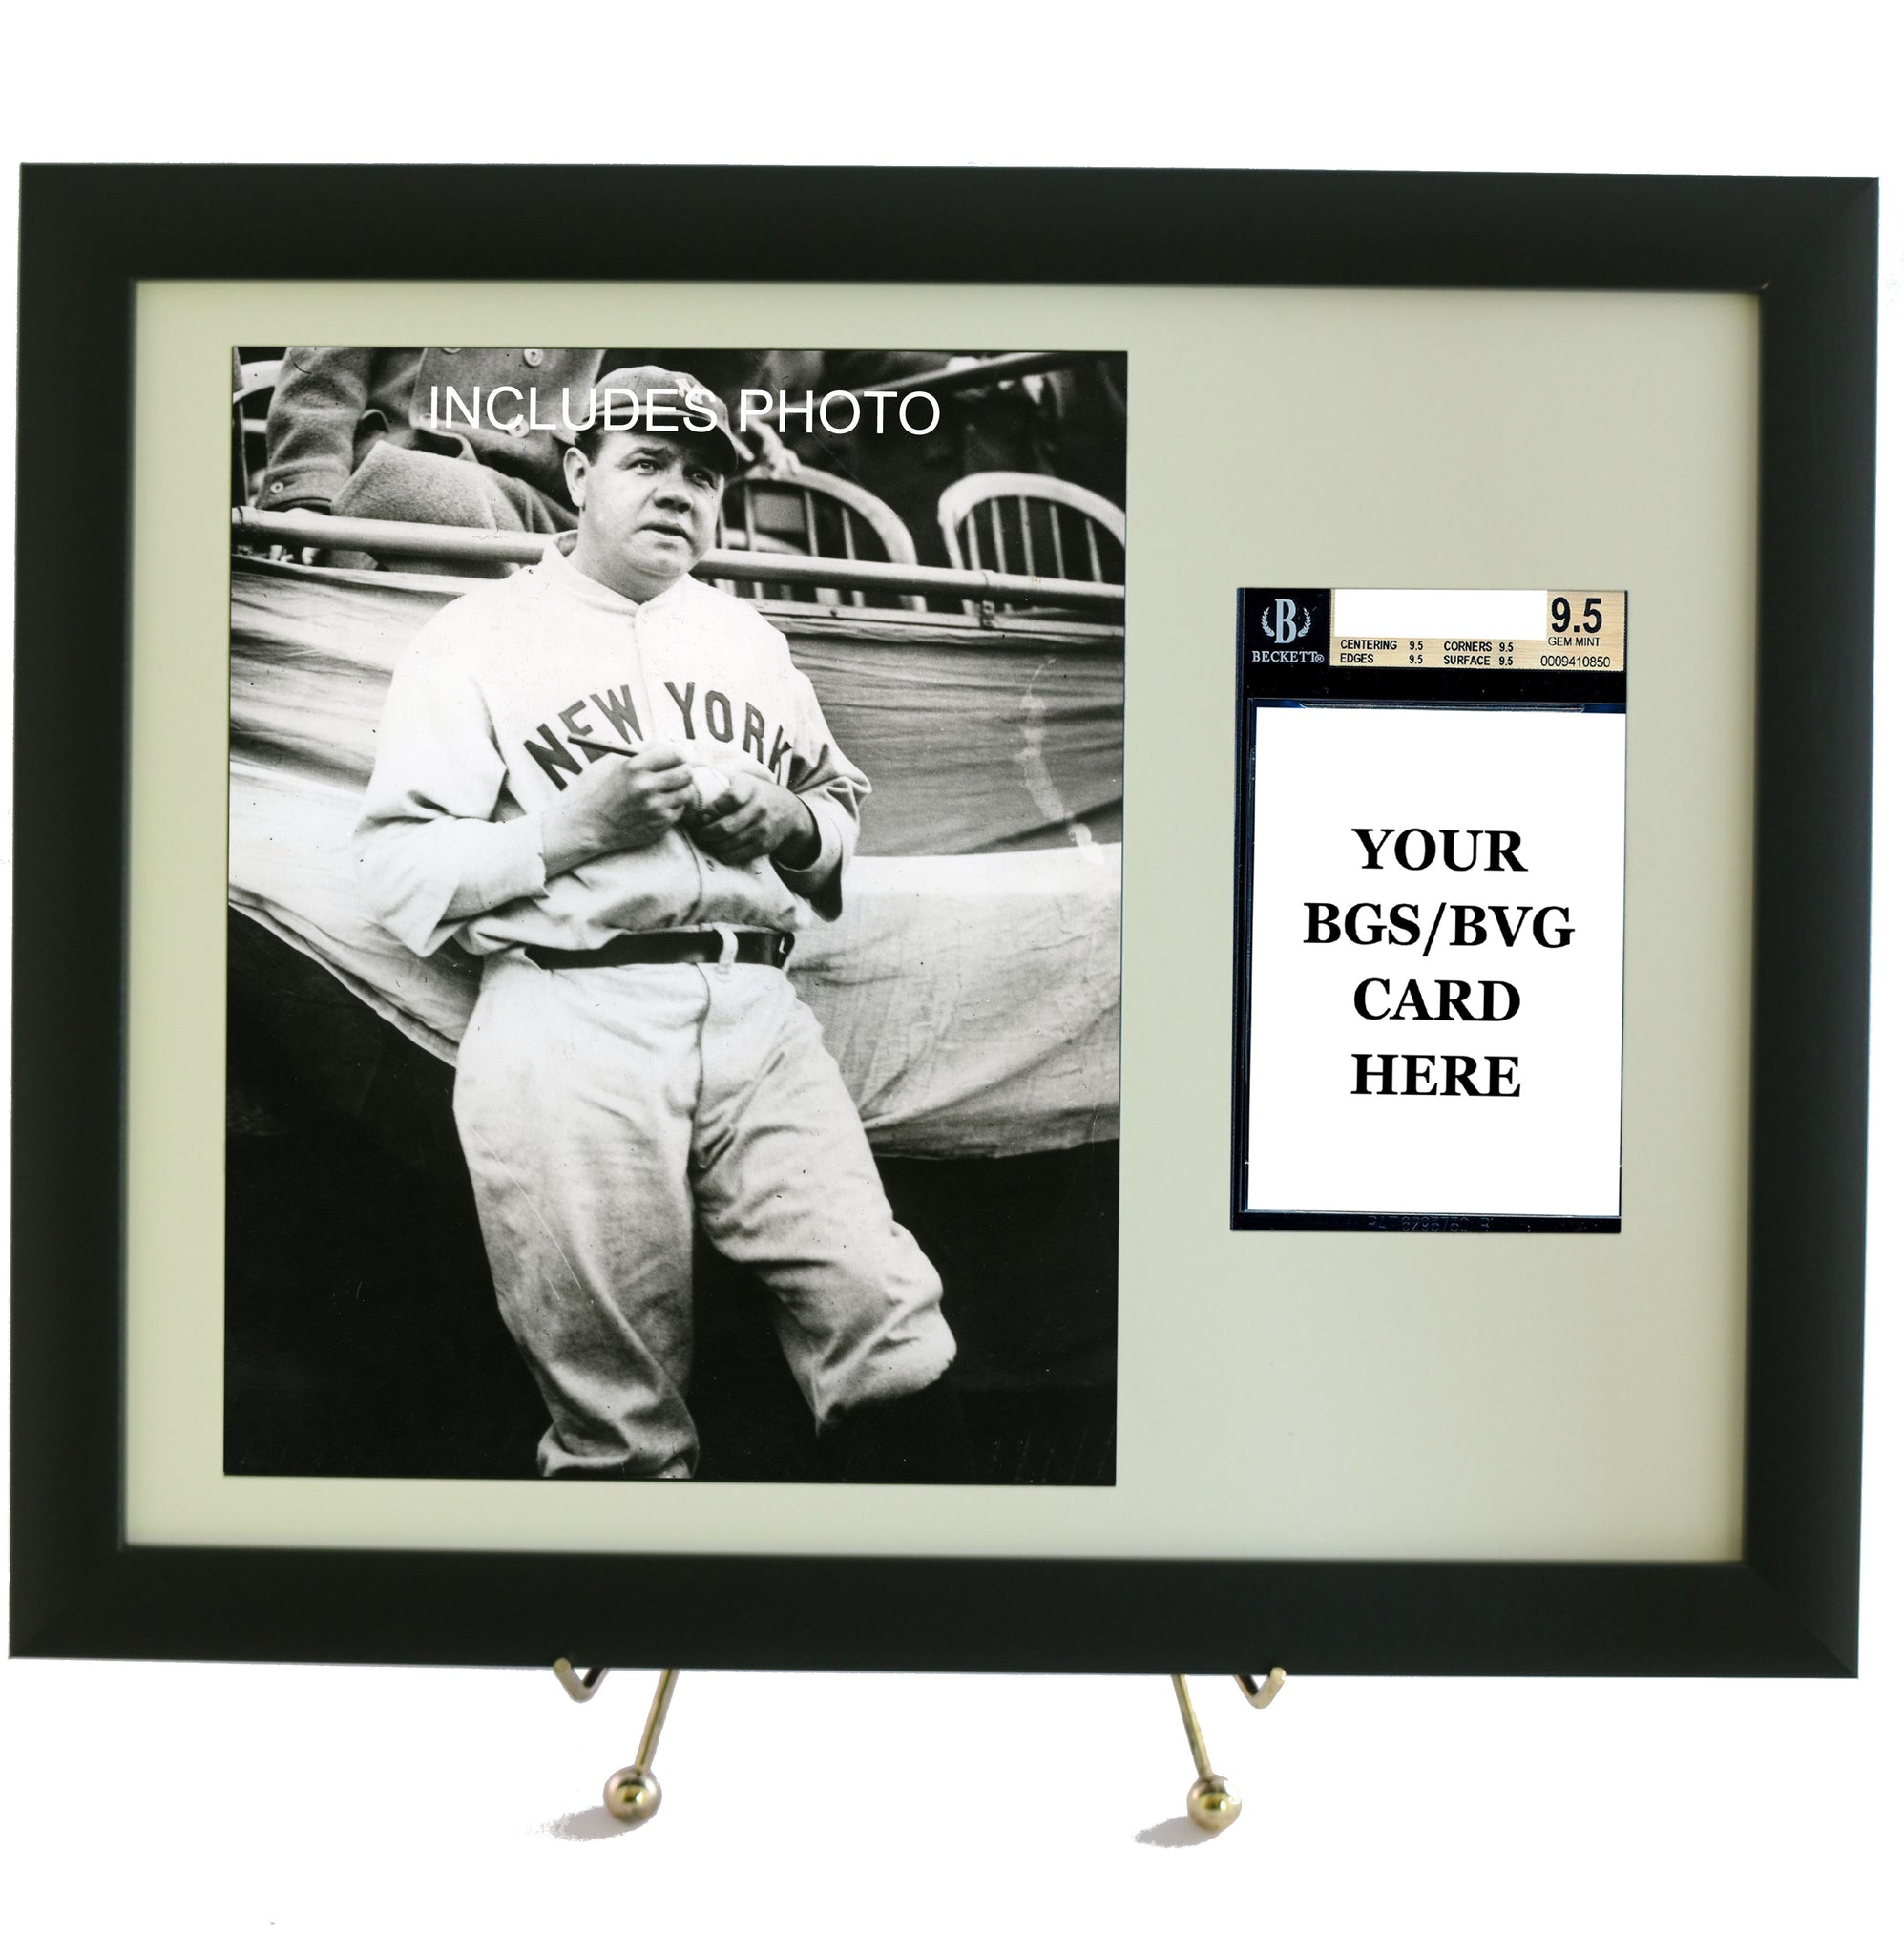 Sports Card Frame for YOUR BVG (Beckett) Graded Babe Ruth Card (INCLUDES PHOTO) - Graded And Framed